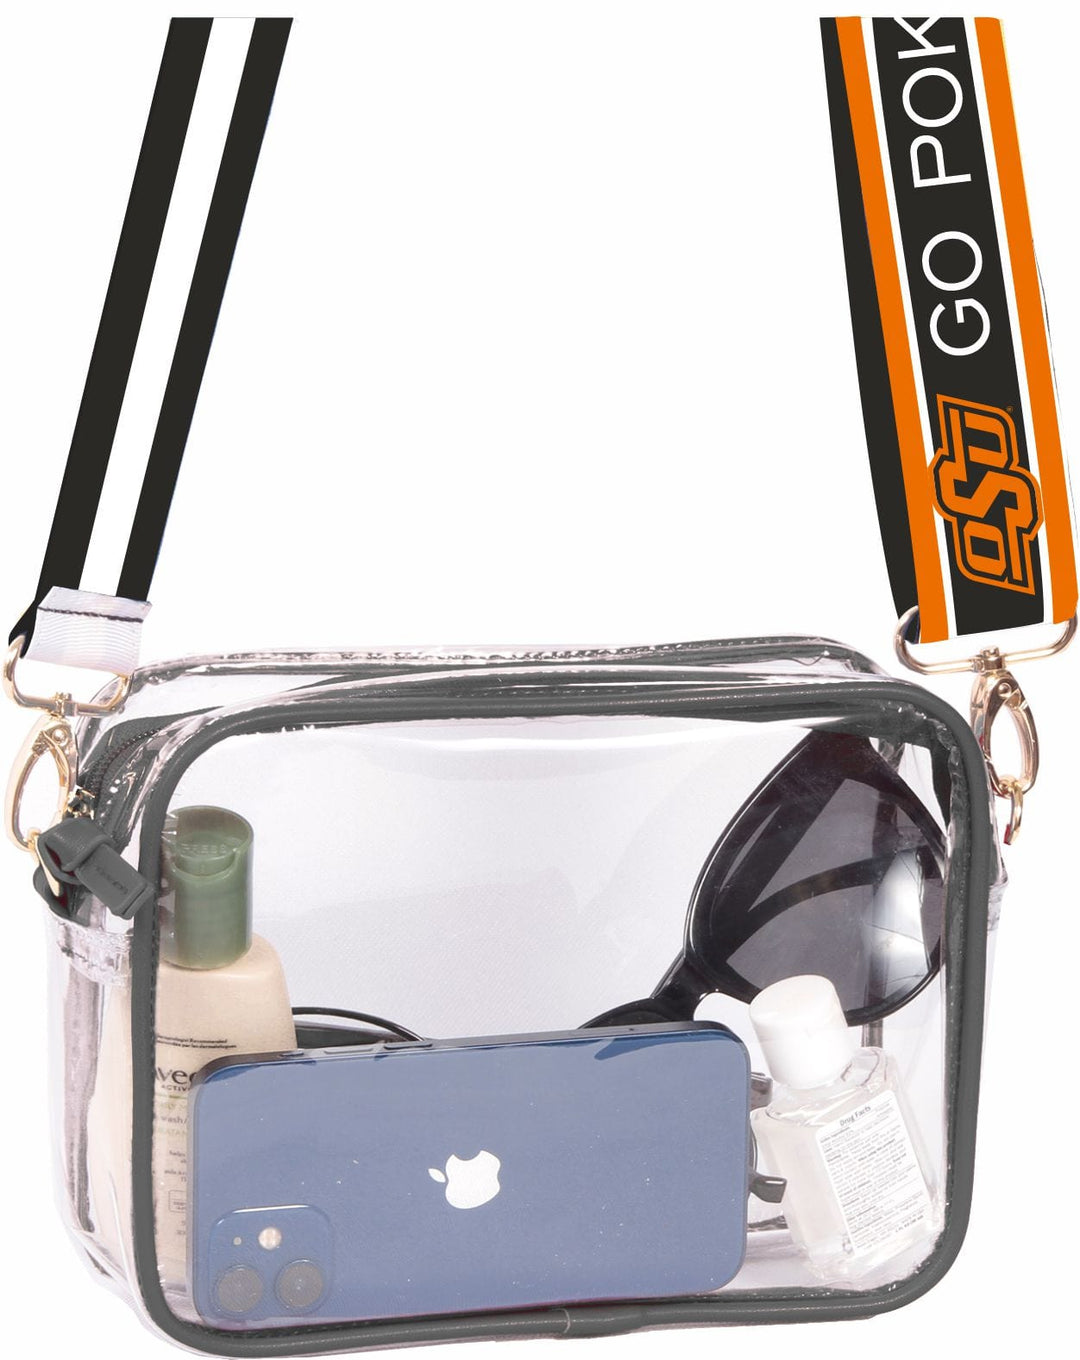 Desden Purse Bridget Clear Purse with Patterned Shoulder Straps - Oklahoma State